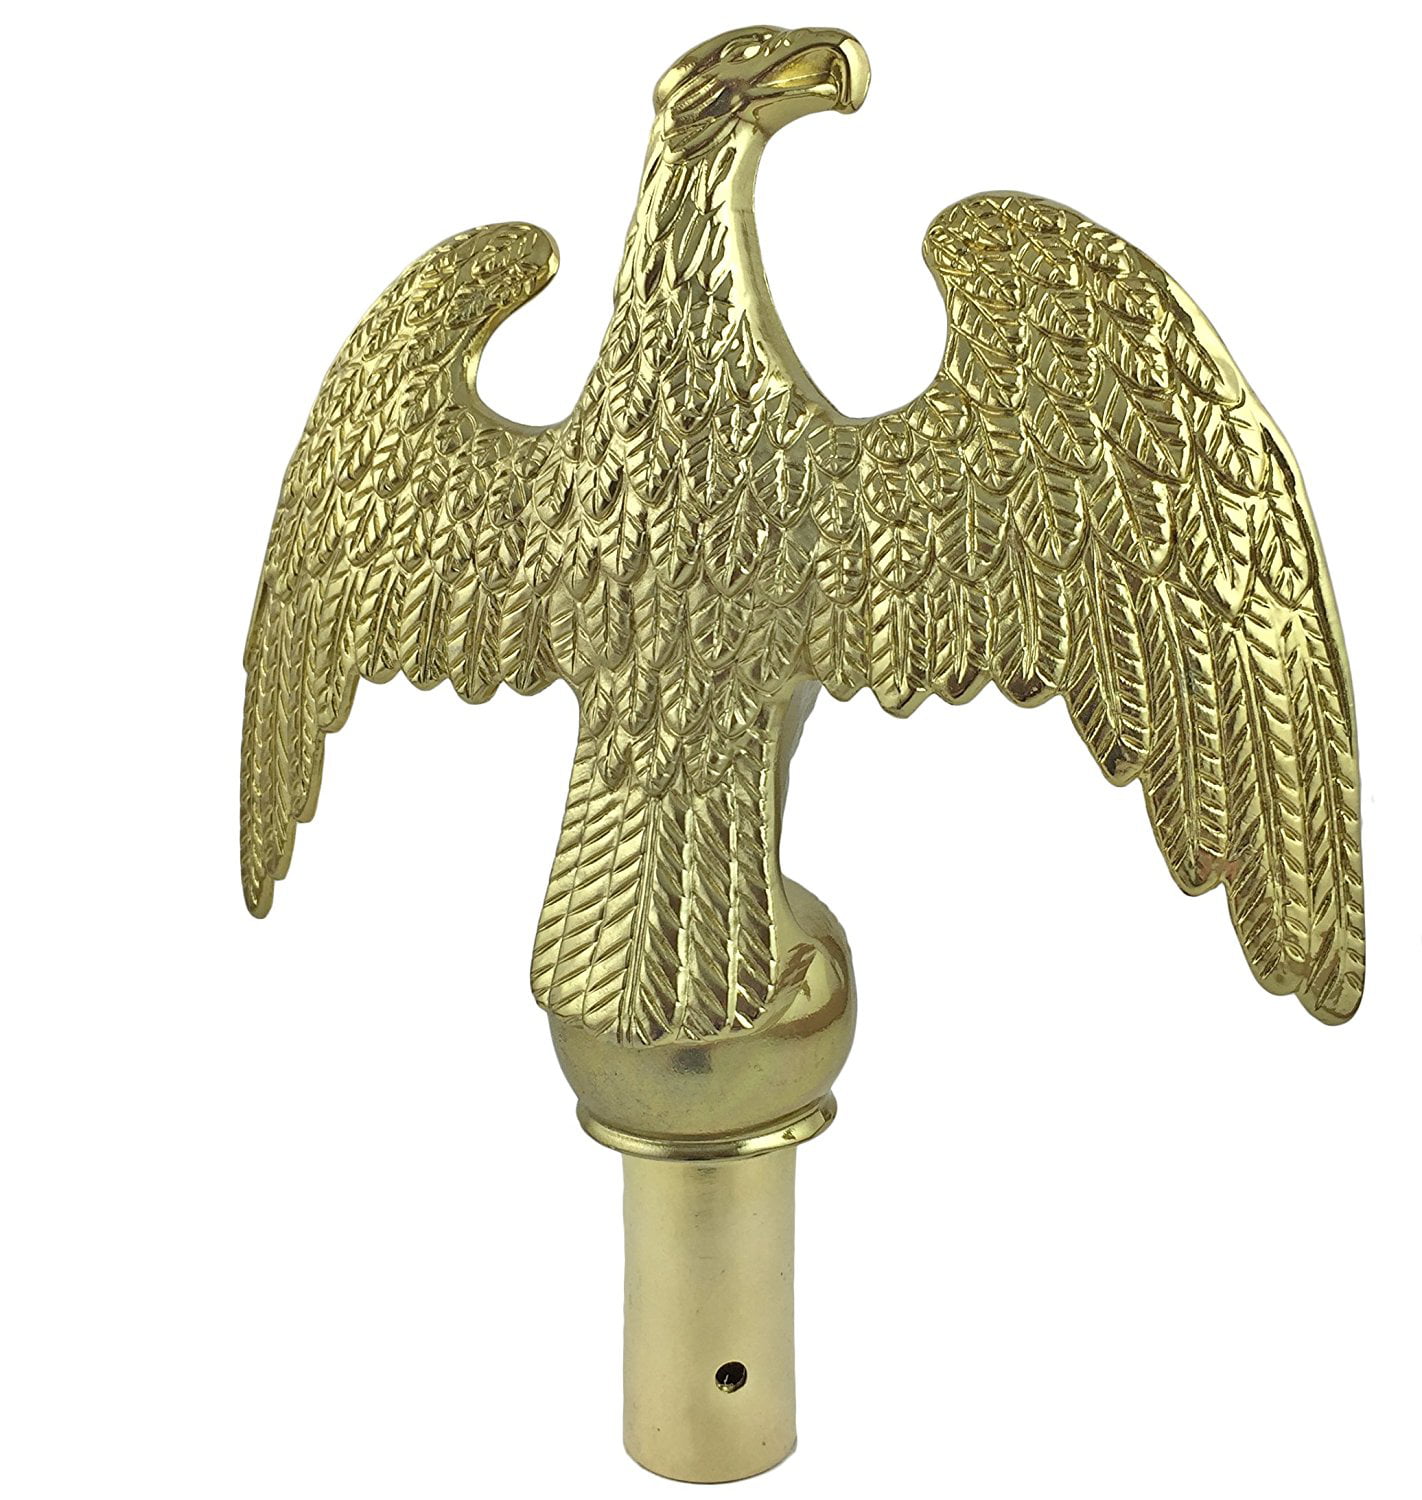 Eagle Top Ornament Plastic Gilt Gold For A 3/4 Inch diameter pole by Eder Flag 